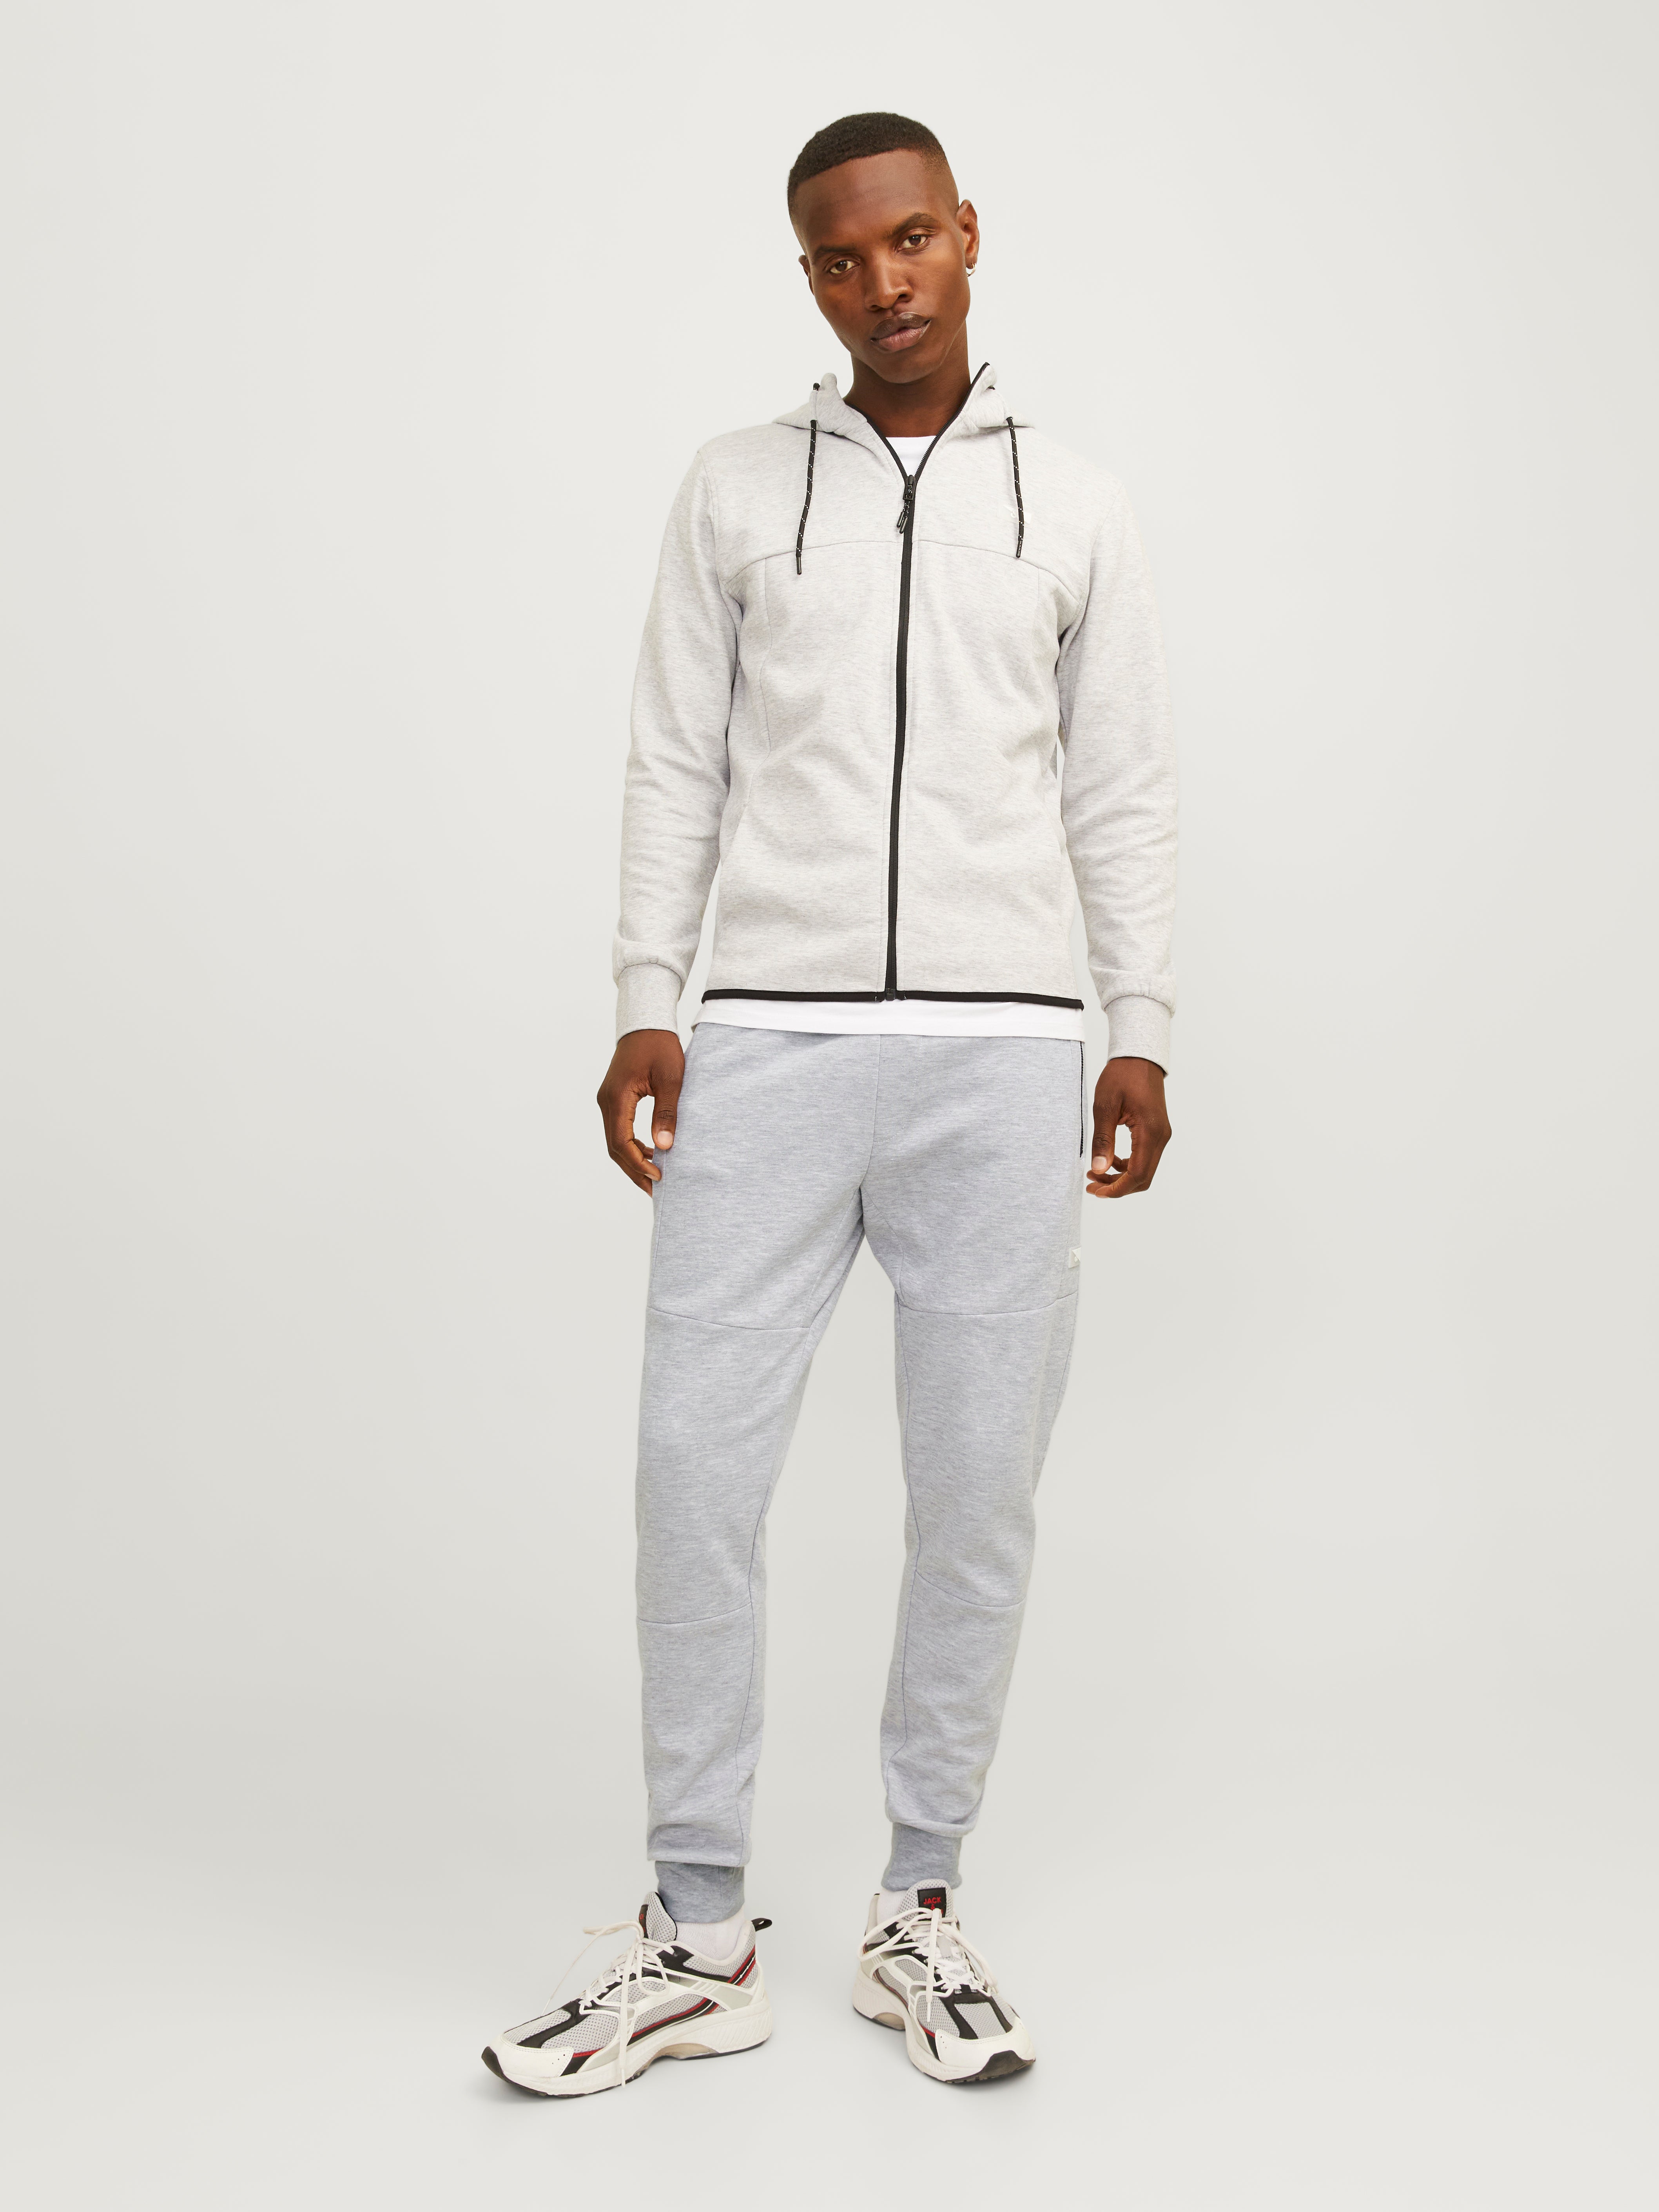 Le Breve slim fit joggers in light grey